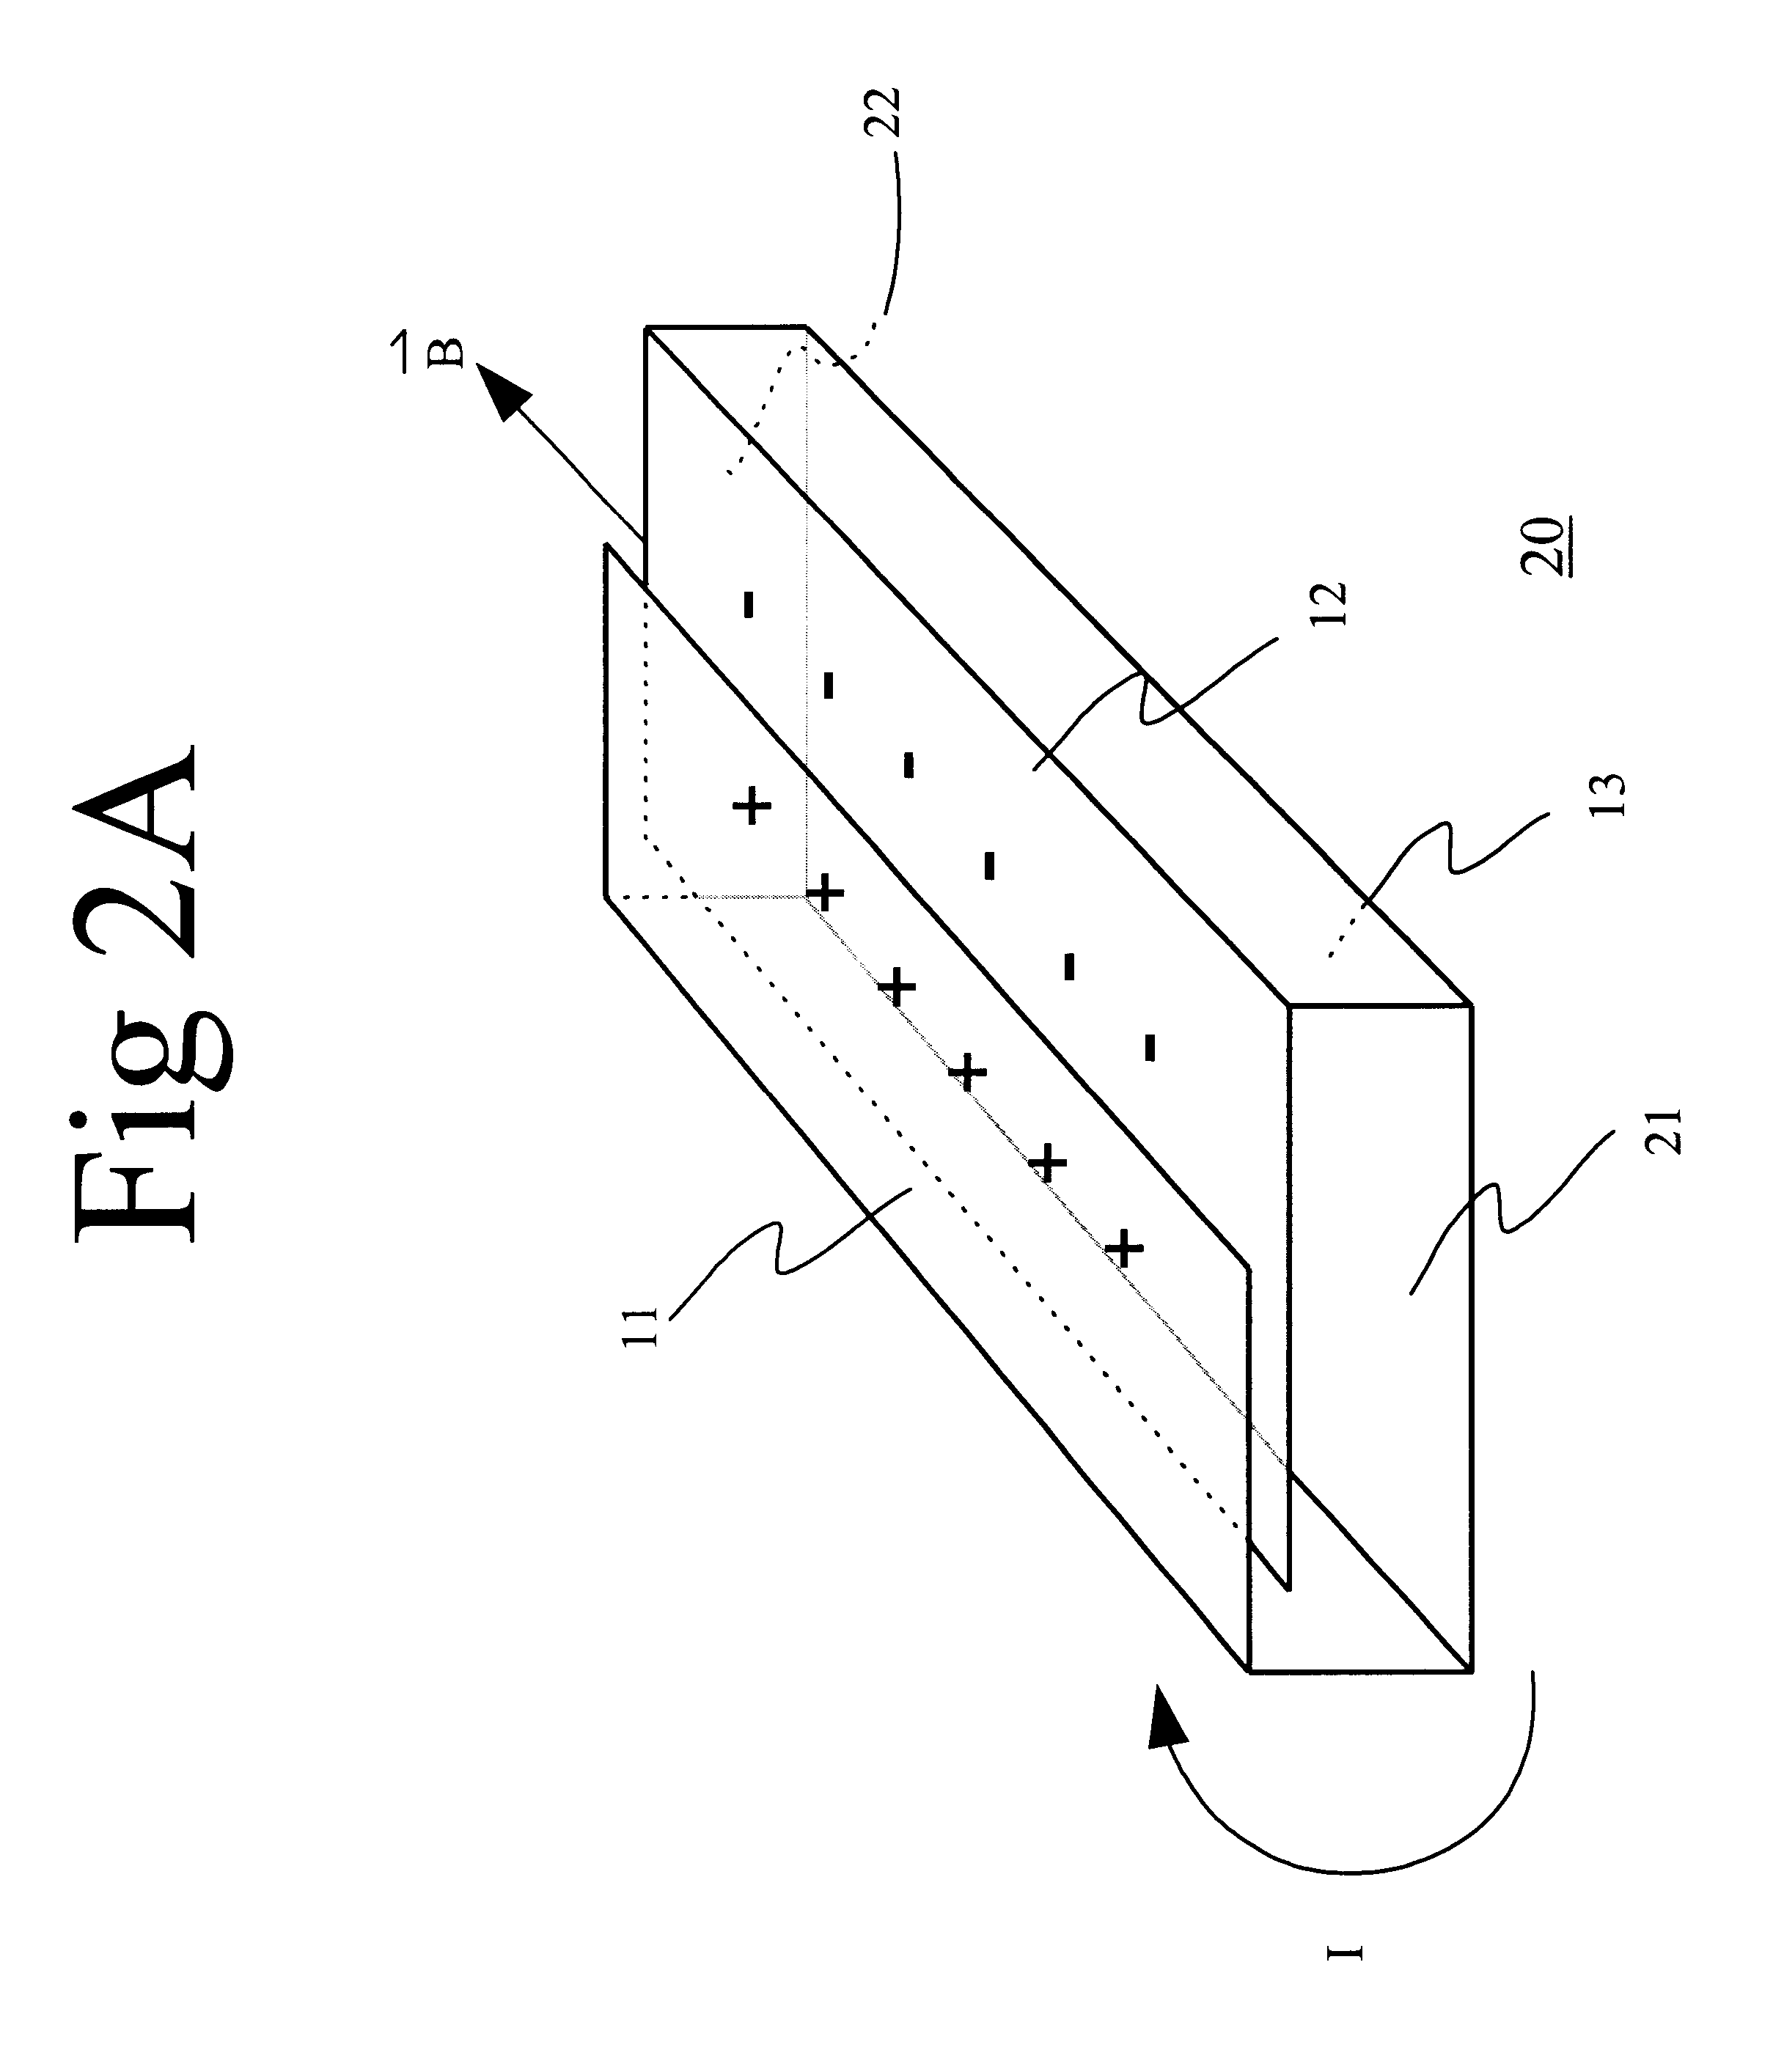 Magnetic dipole antenna structure and method